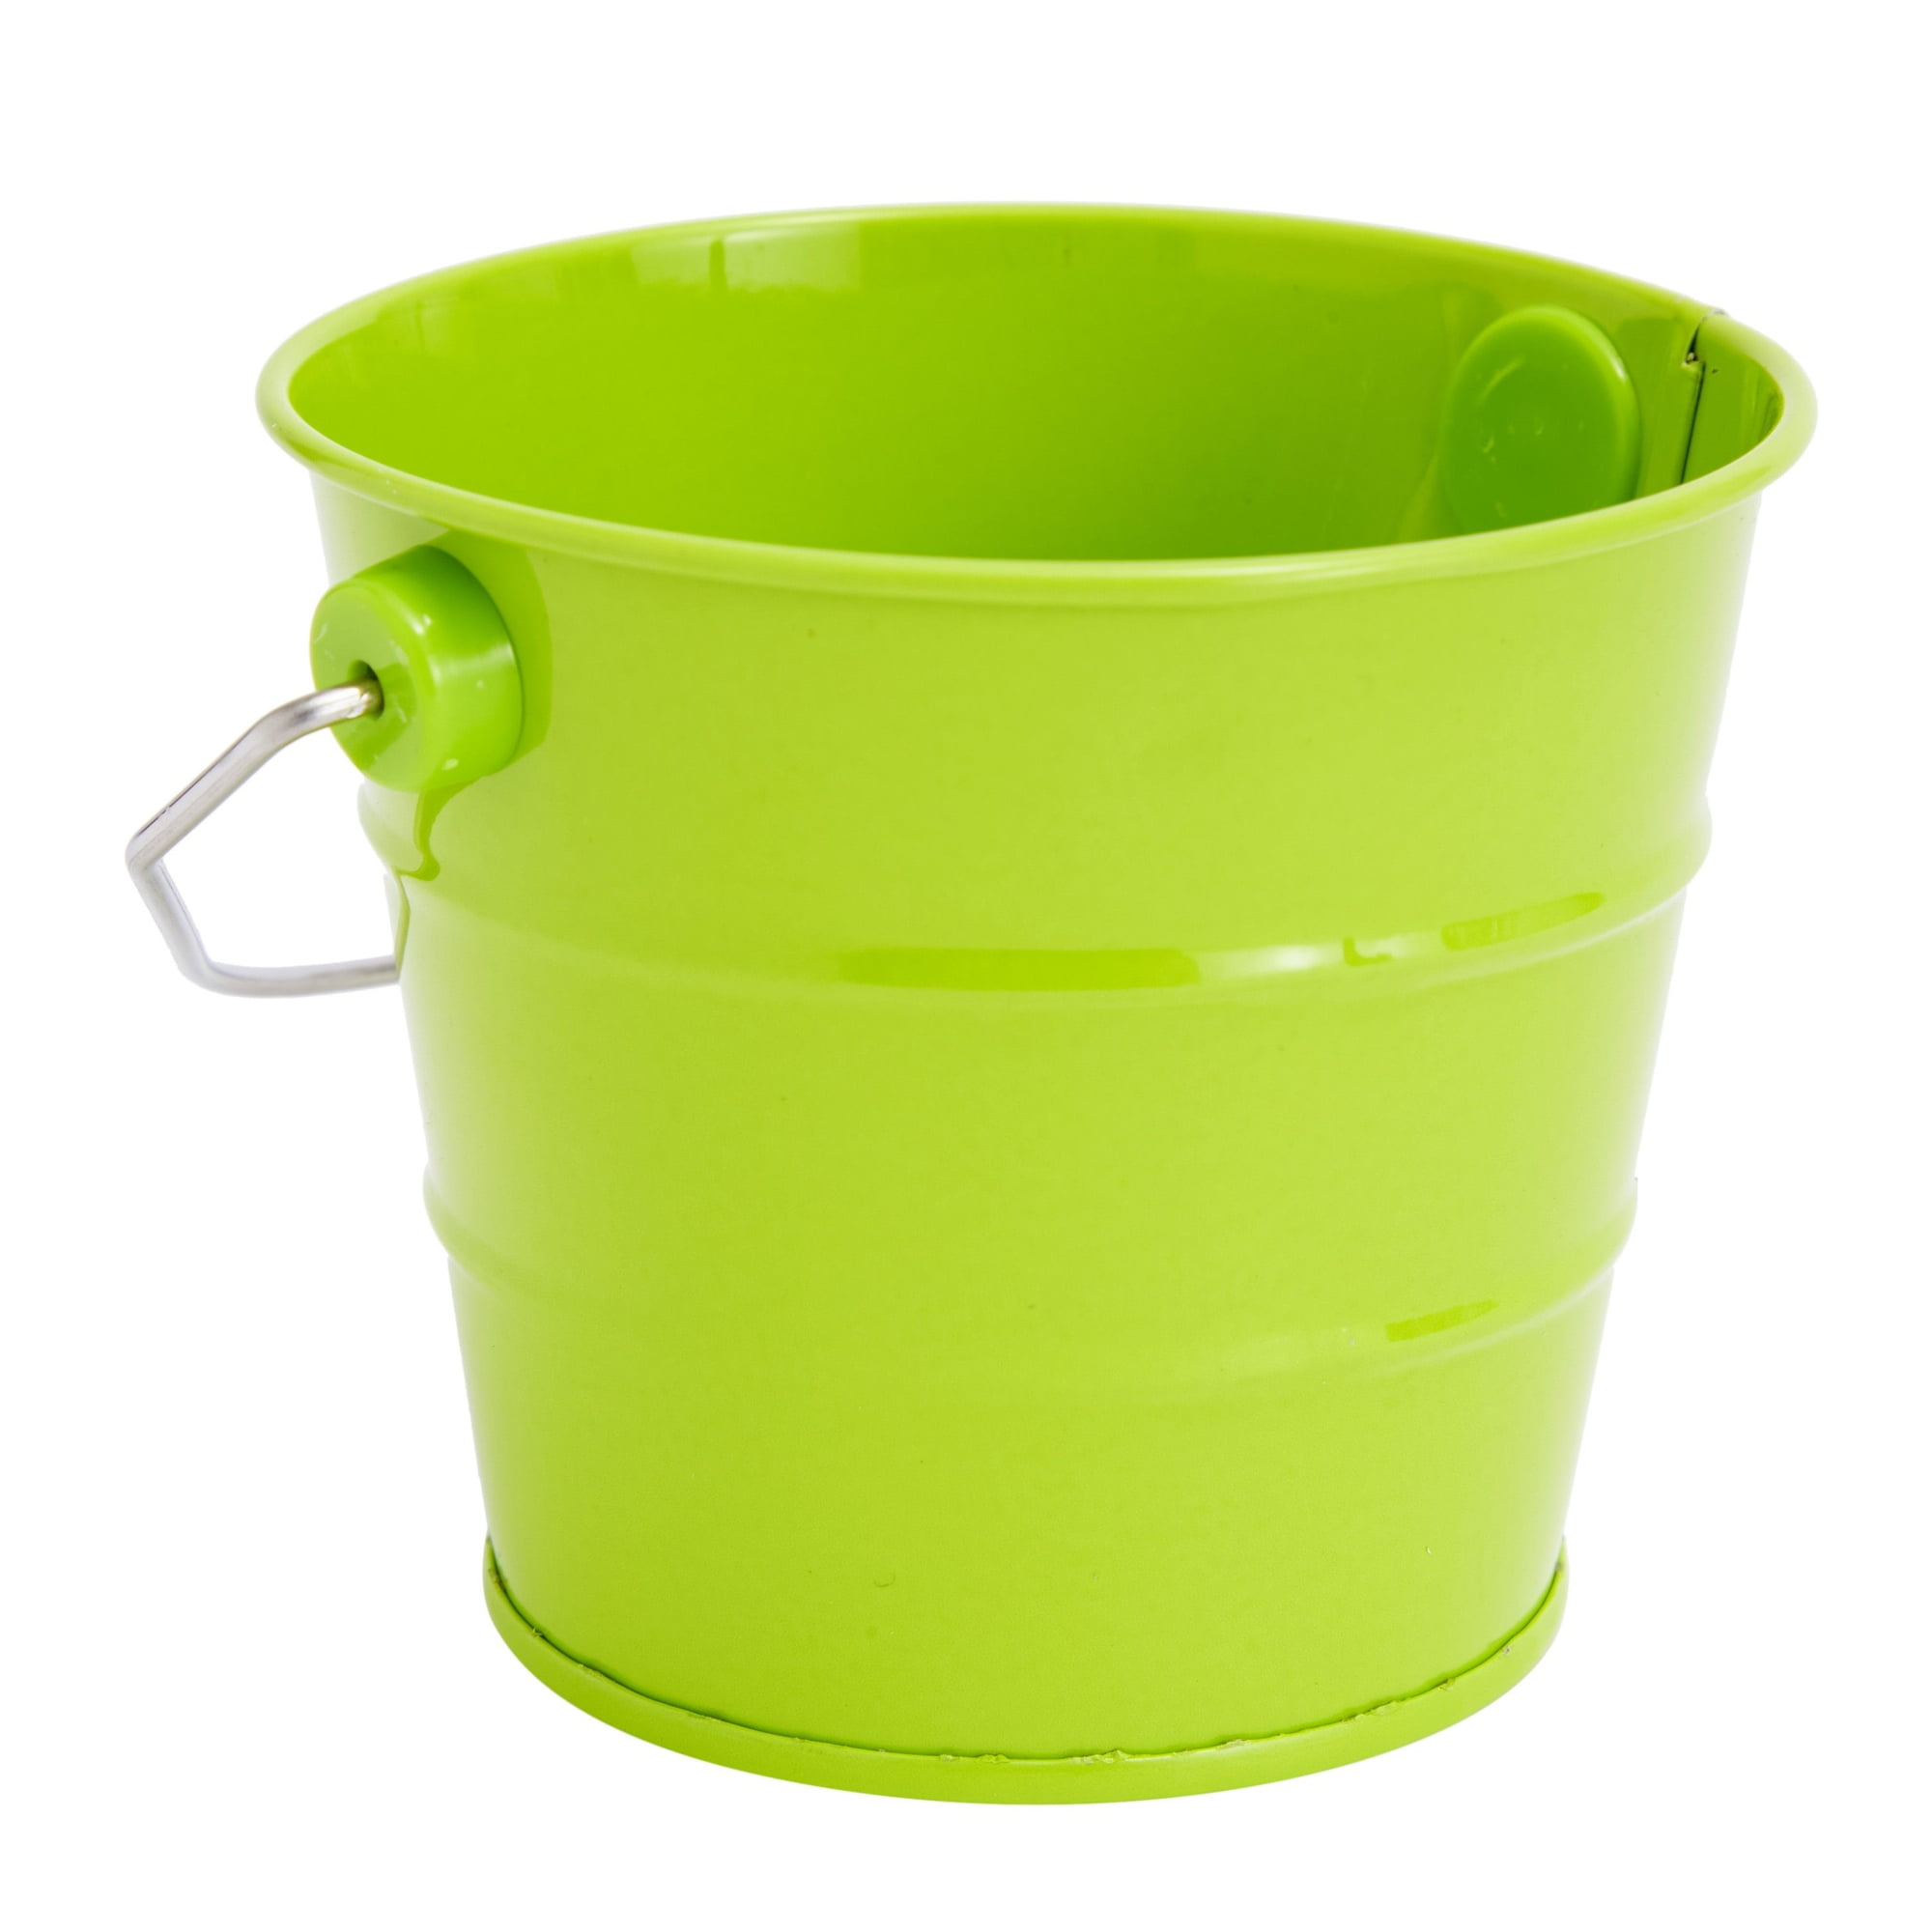  TAKMA Small Metal Buckets with Handle - 6 Pack Colored  Galvanized Bucket for Kids,Classroom,Crafts,and Party Favors  (Multi-Colored, 4.3 Top) : Home & Kitchen